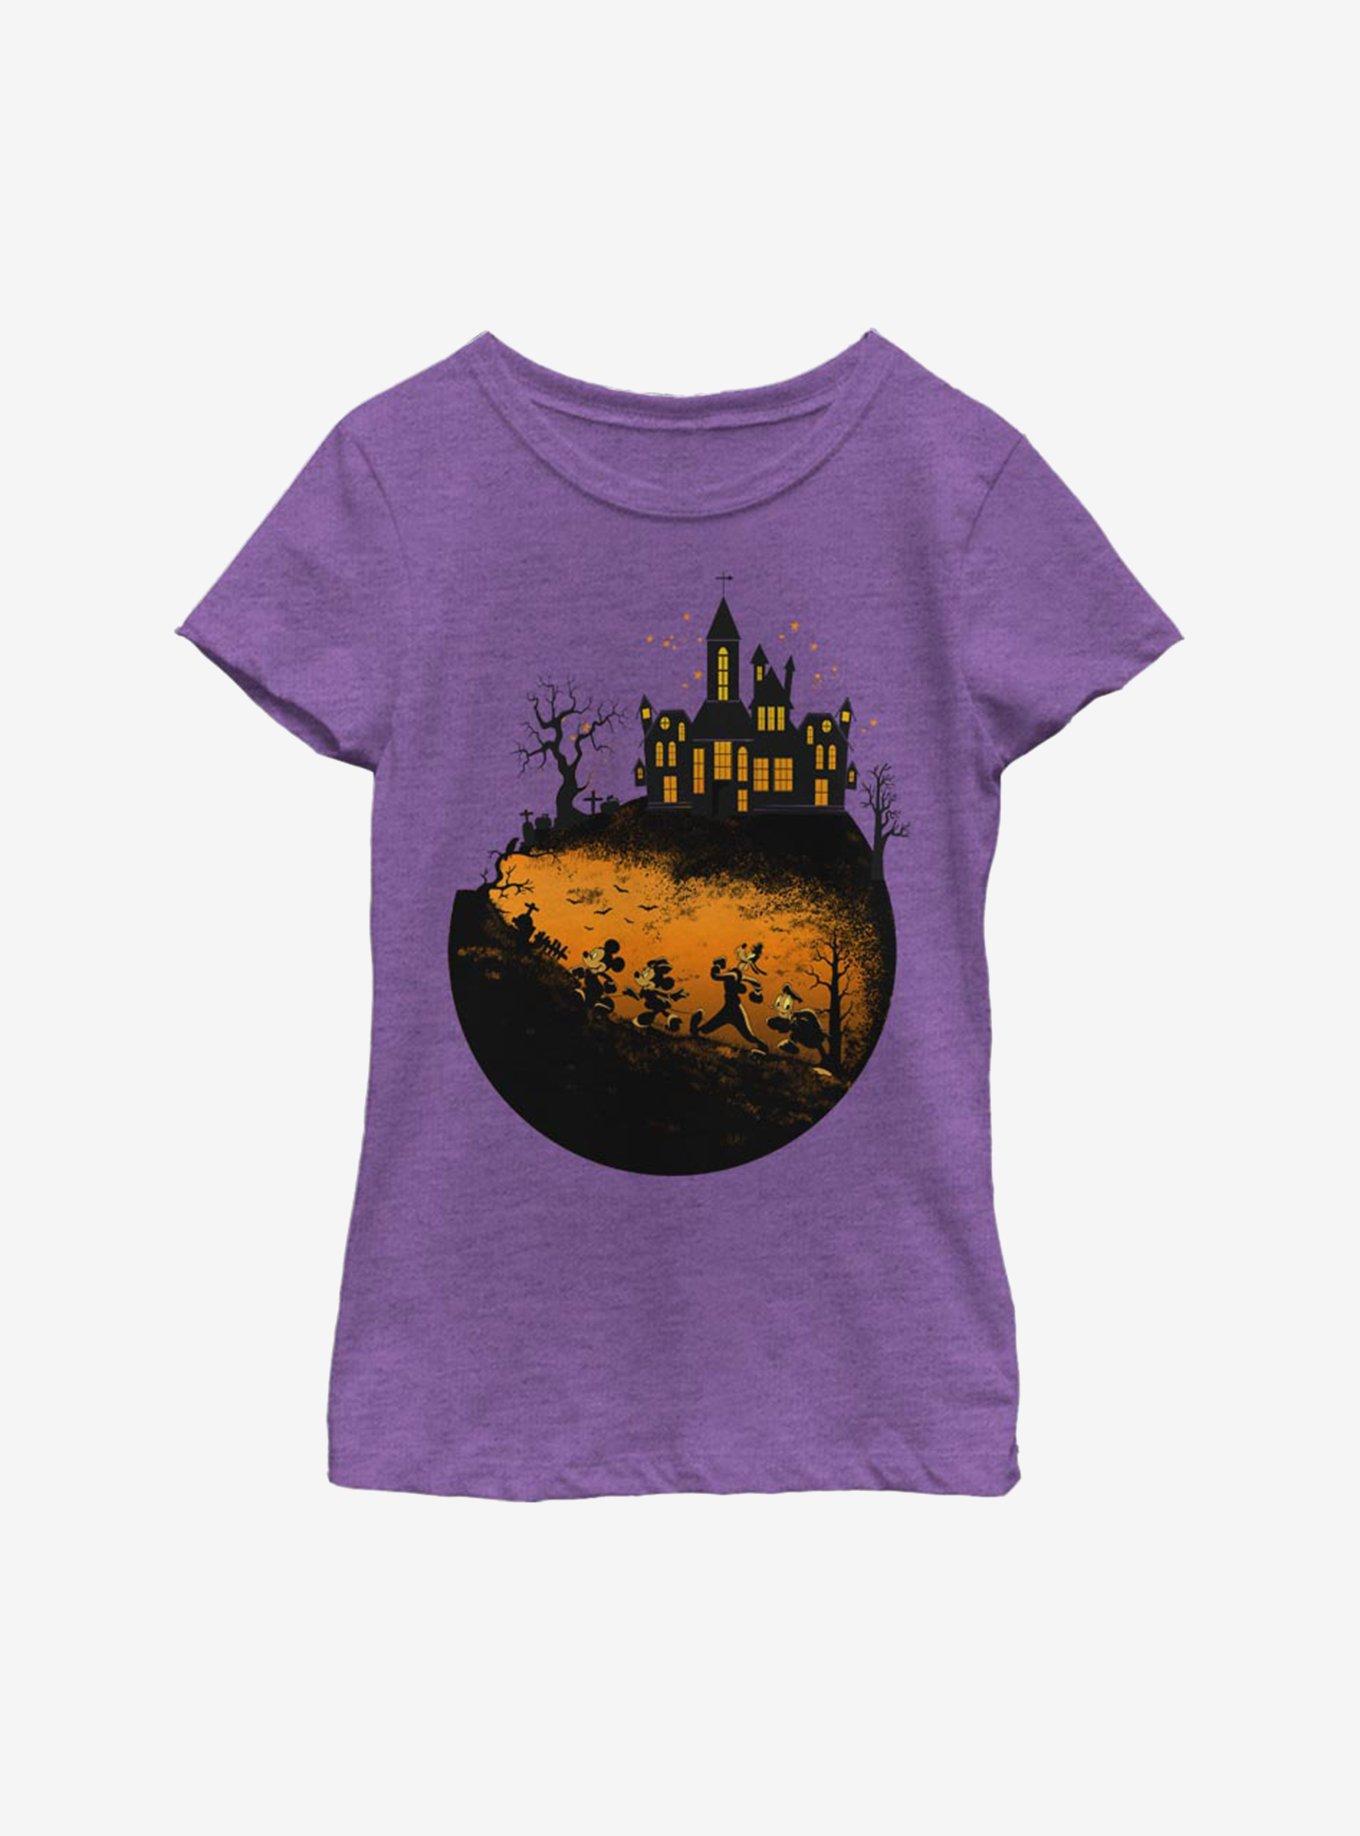 Disney Mickey Mouse Mickey's Haunted Halloween Youth Girls T-Shirt, PURPLE BERRY, hi-res